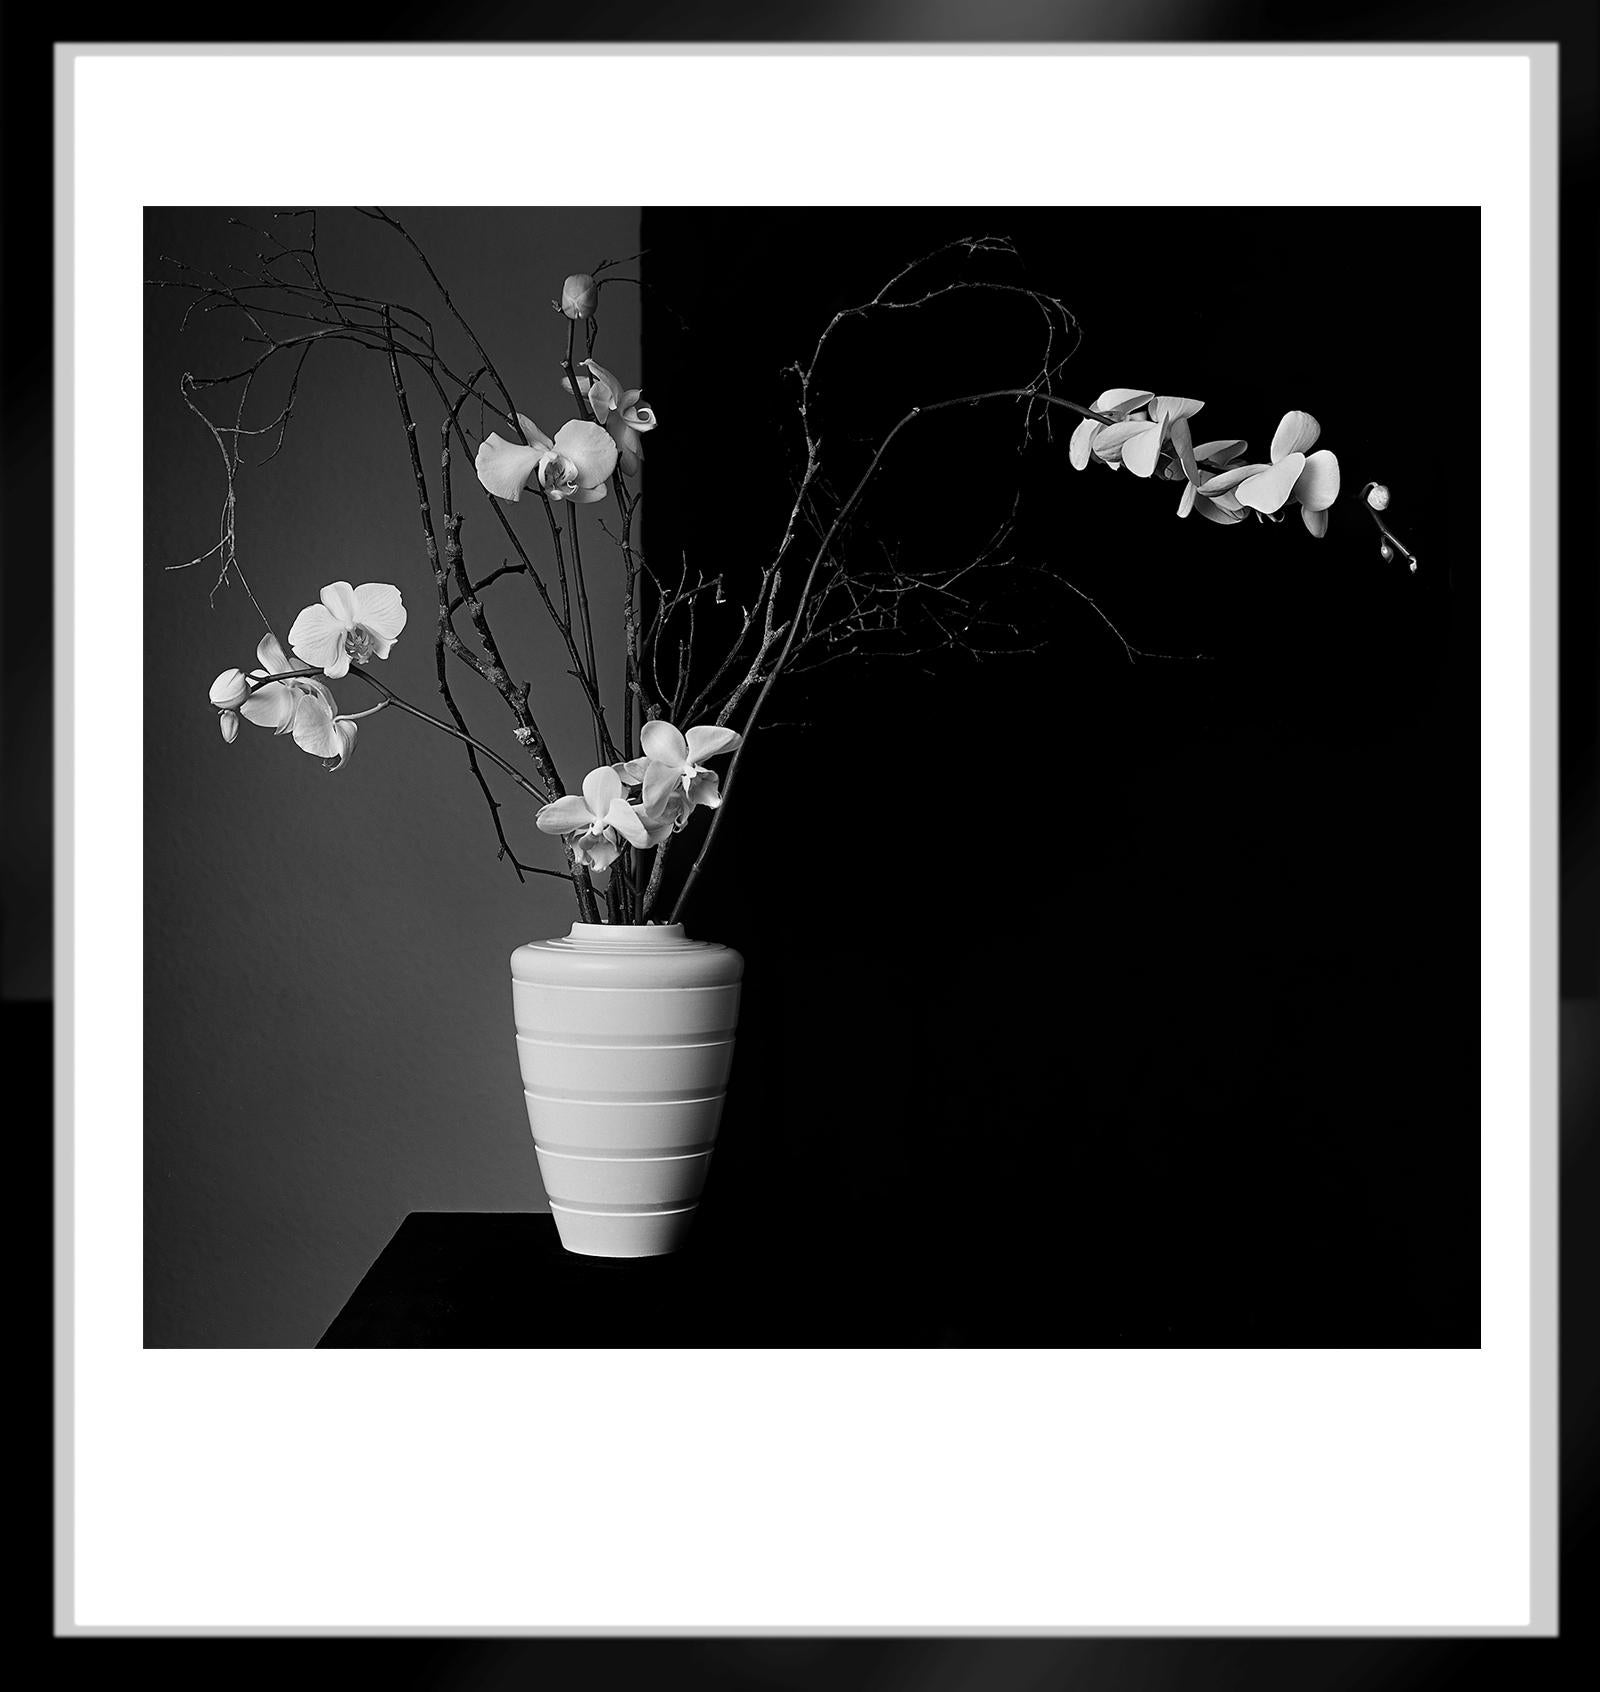 An original signed archival pigment print on Hahnemühle Photo Rag® Baryta 315 gsm paper by Scottish artist Ian Sanderson (1951- 2020) titled ‘Orchids‘ who was captured on film in 1985. 

Signed by Ian Sanderson lower right and numbered lower left,